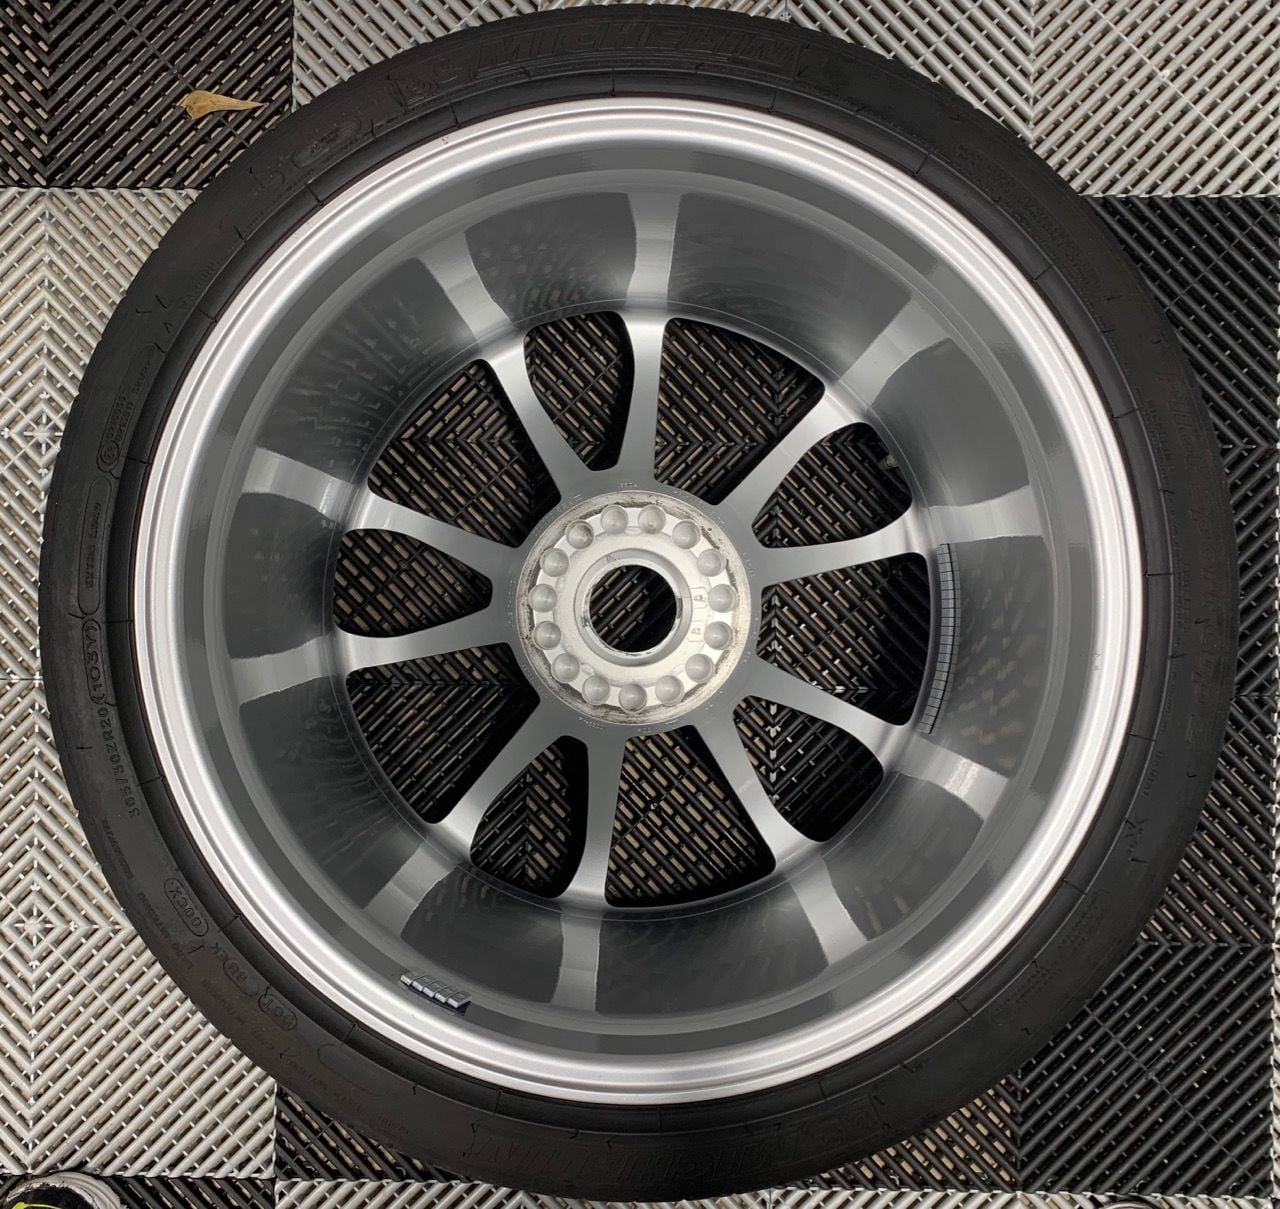 Wheels and Tires/Axles - Porsche GT3 991.2 OEM wheels and Cup2 tires - Used - 2014 to 2019 Porsche GT3 - Atlanta, GA 30309, United States